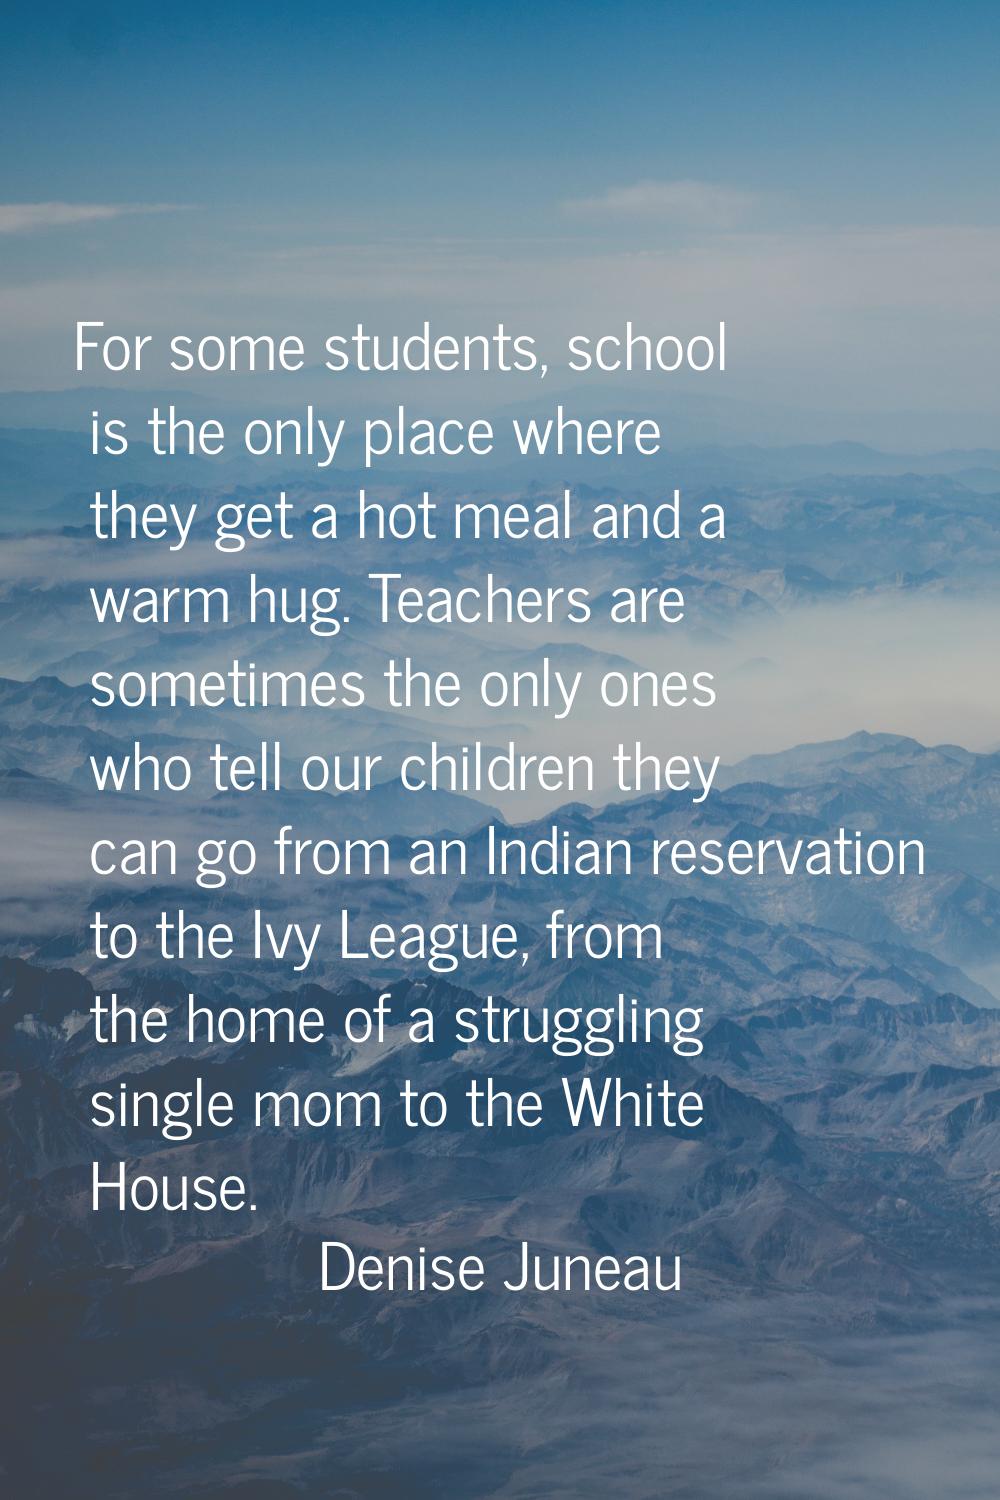 For some students, school is the only place where they get a hot meal and a warm hug. Teachers are 